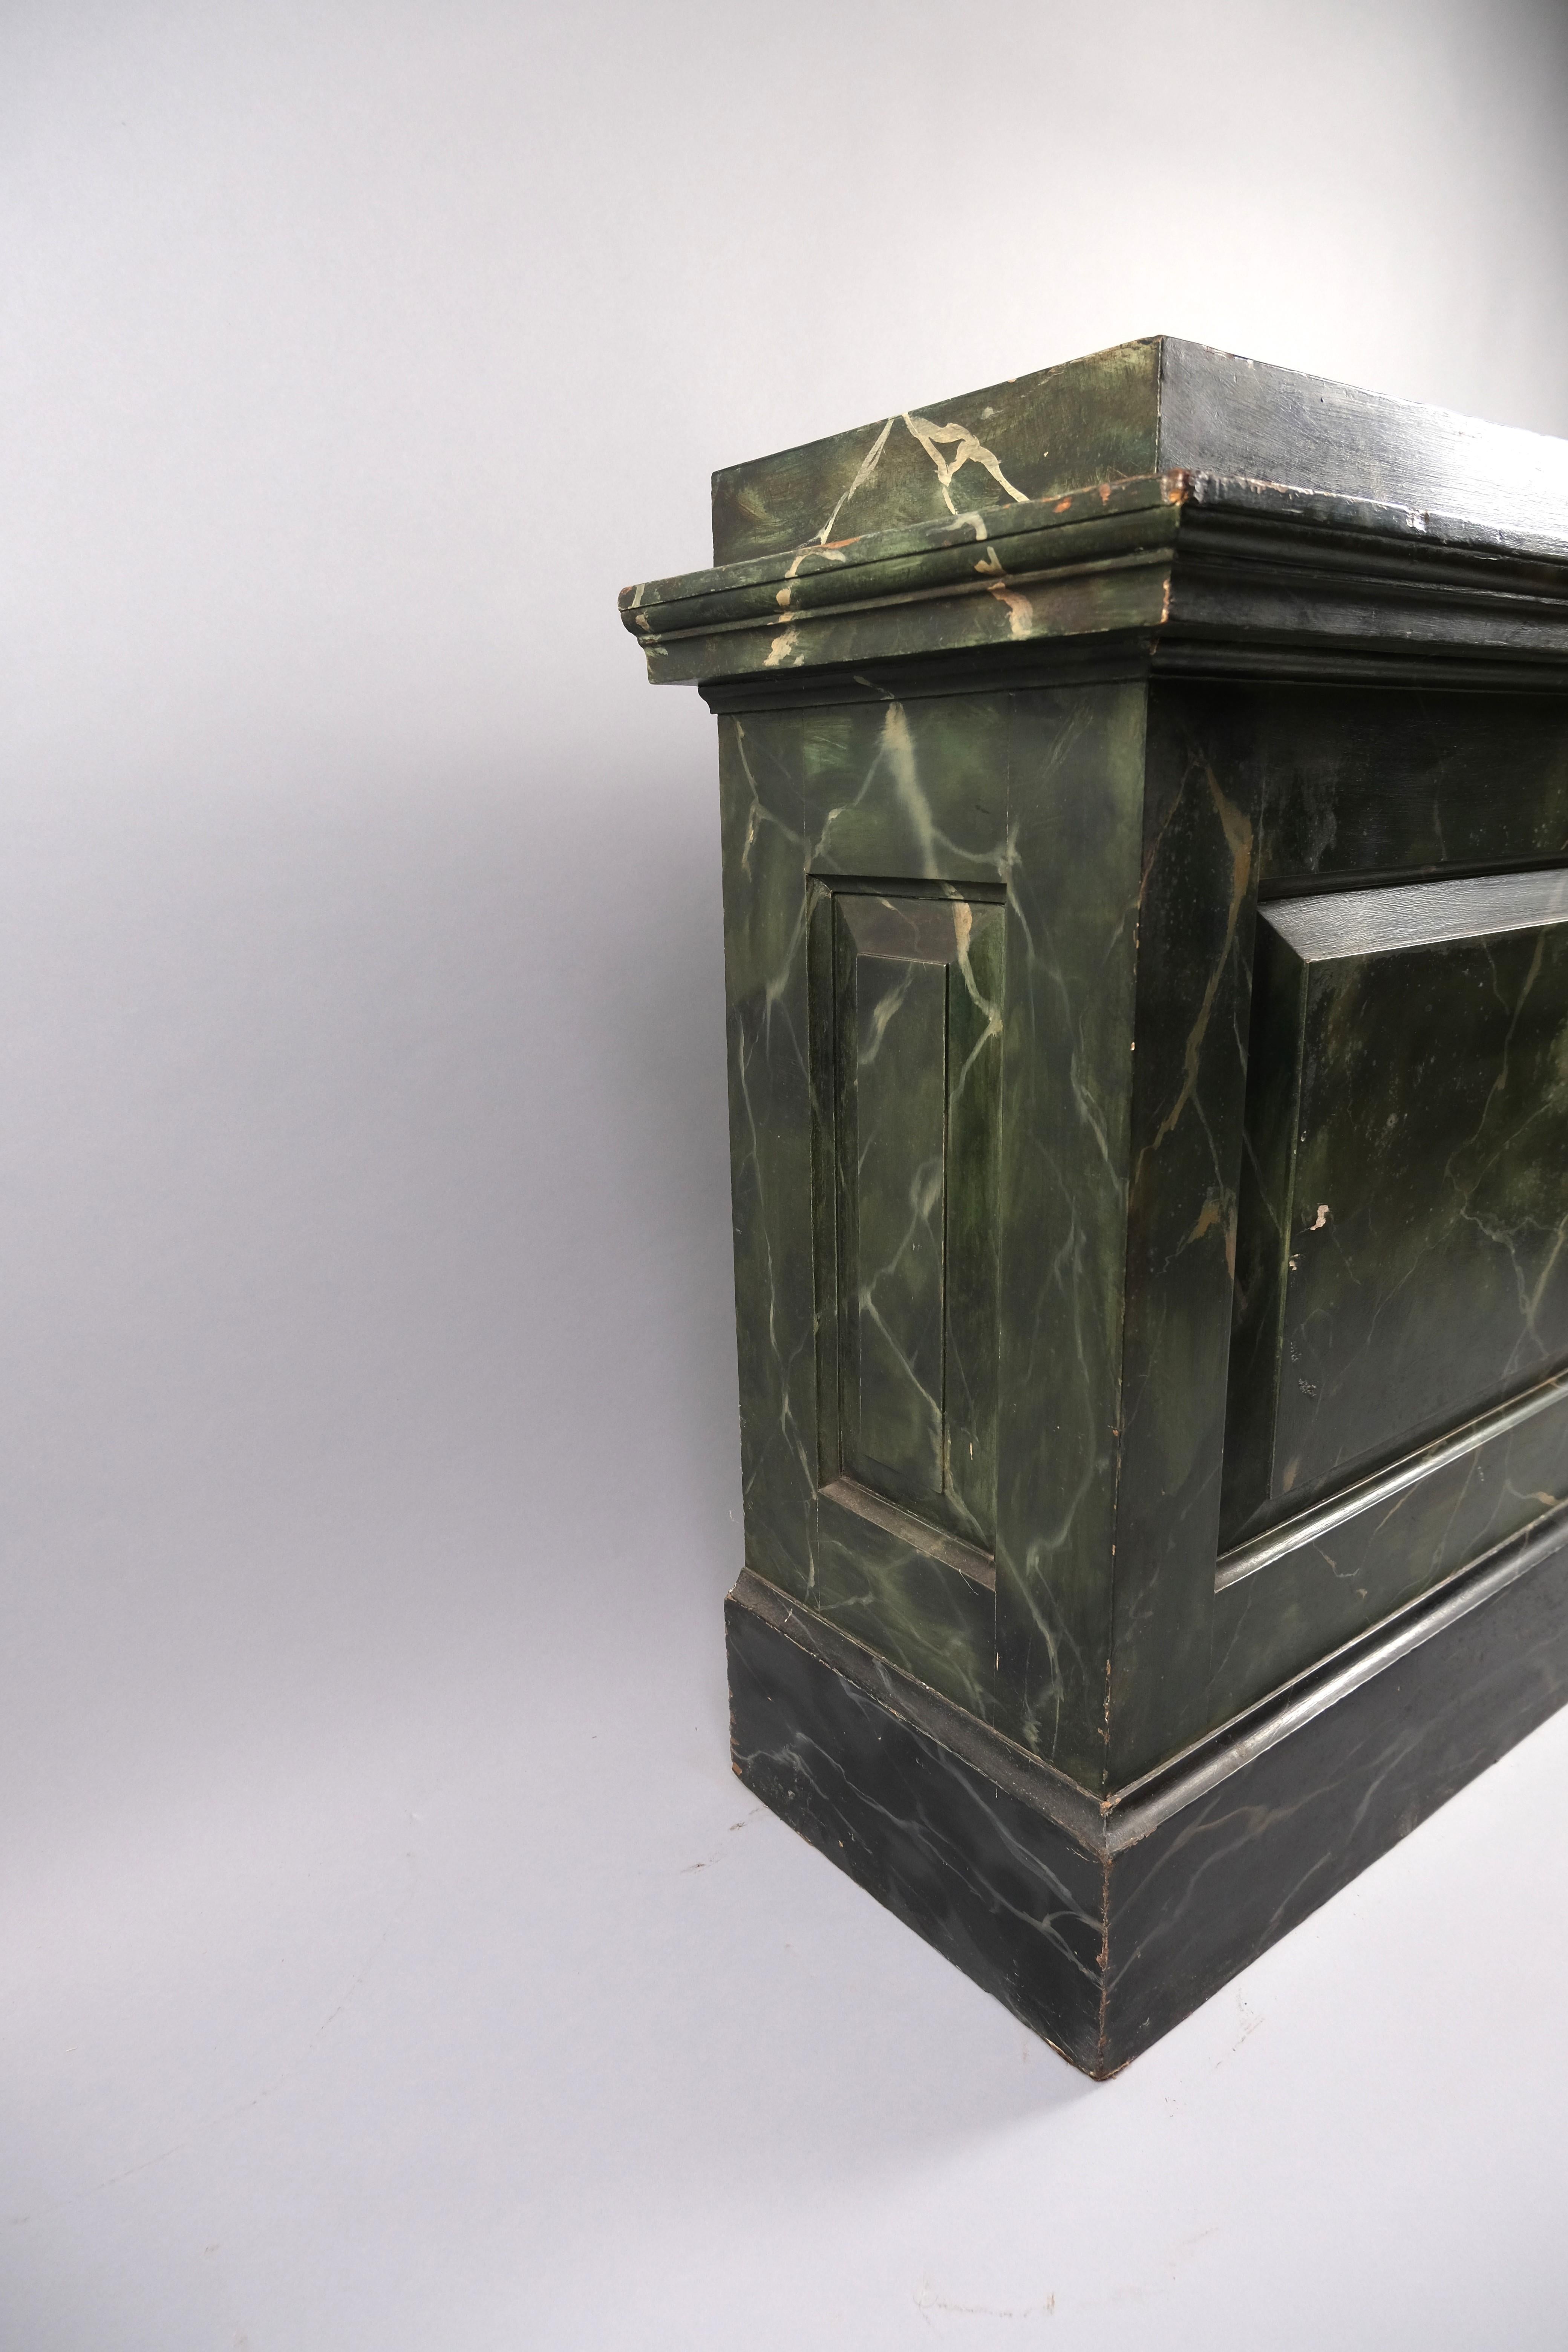 Hutton-Clarke Antiques is delighted to present a genuine work of art from the past: an original hand-painted marble pedestal dating back to approximately 1870. This exquisite piece showcases intricate craftsmanship, featuring a striking faux green